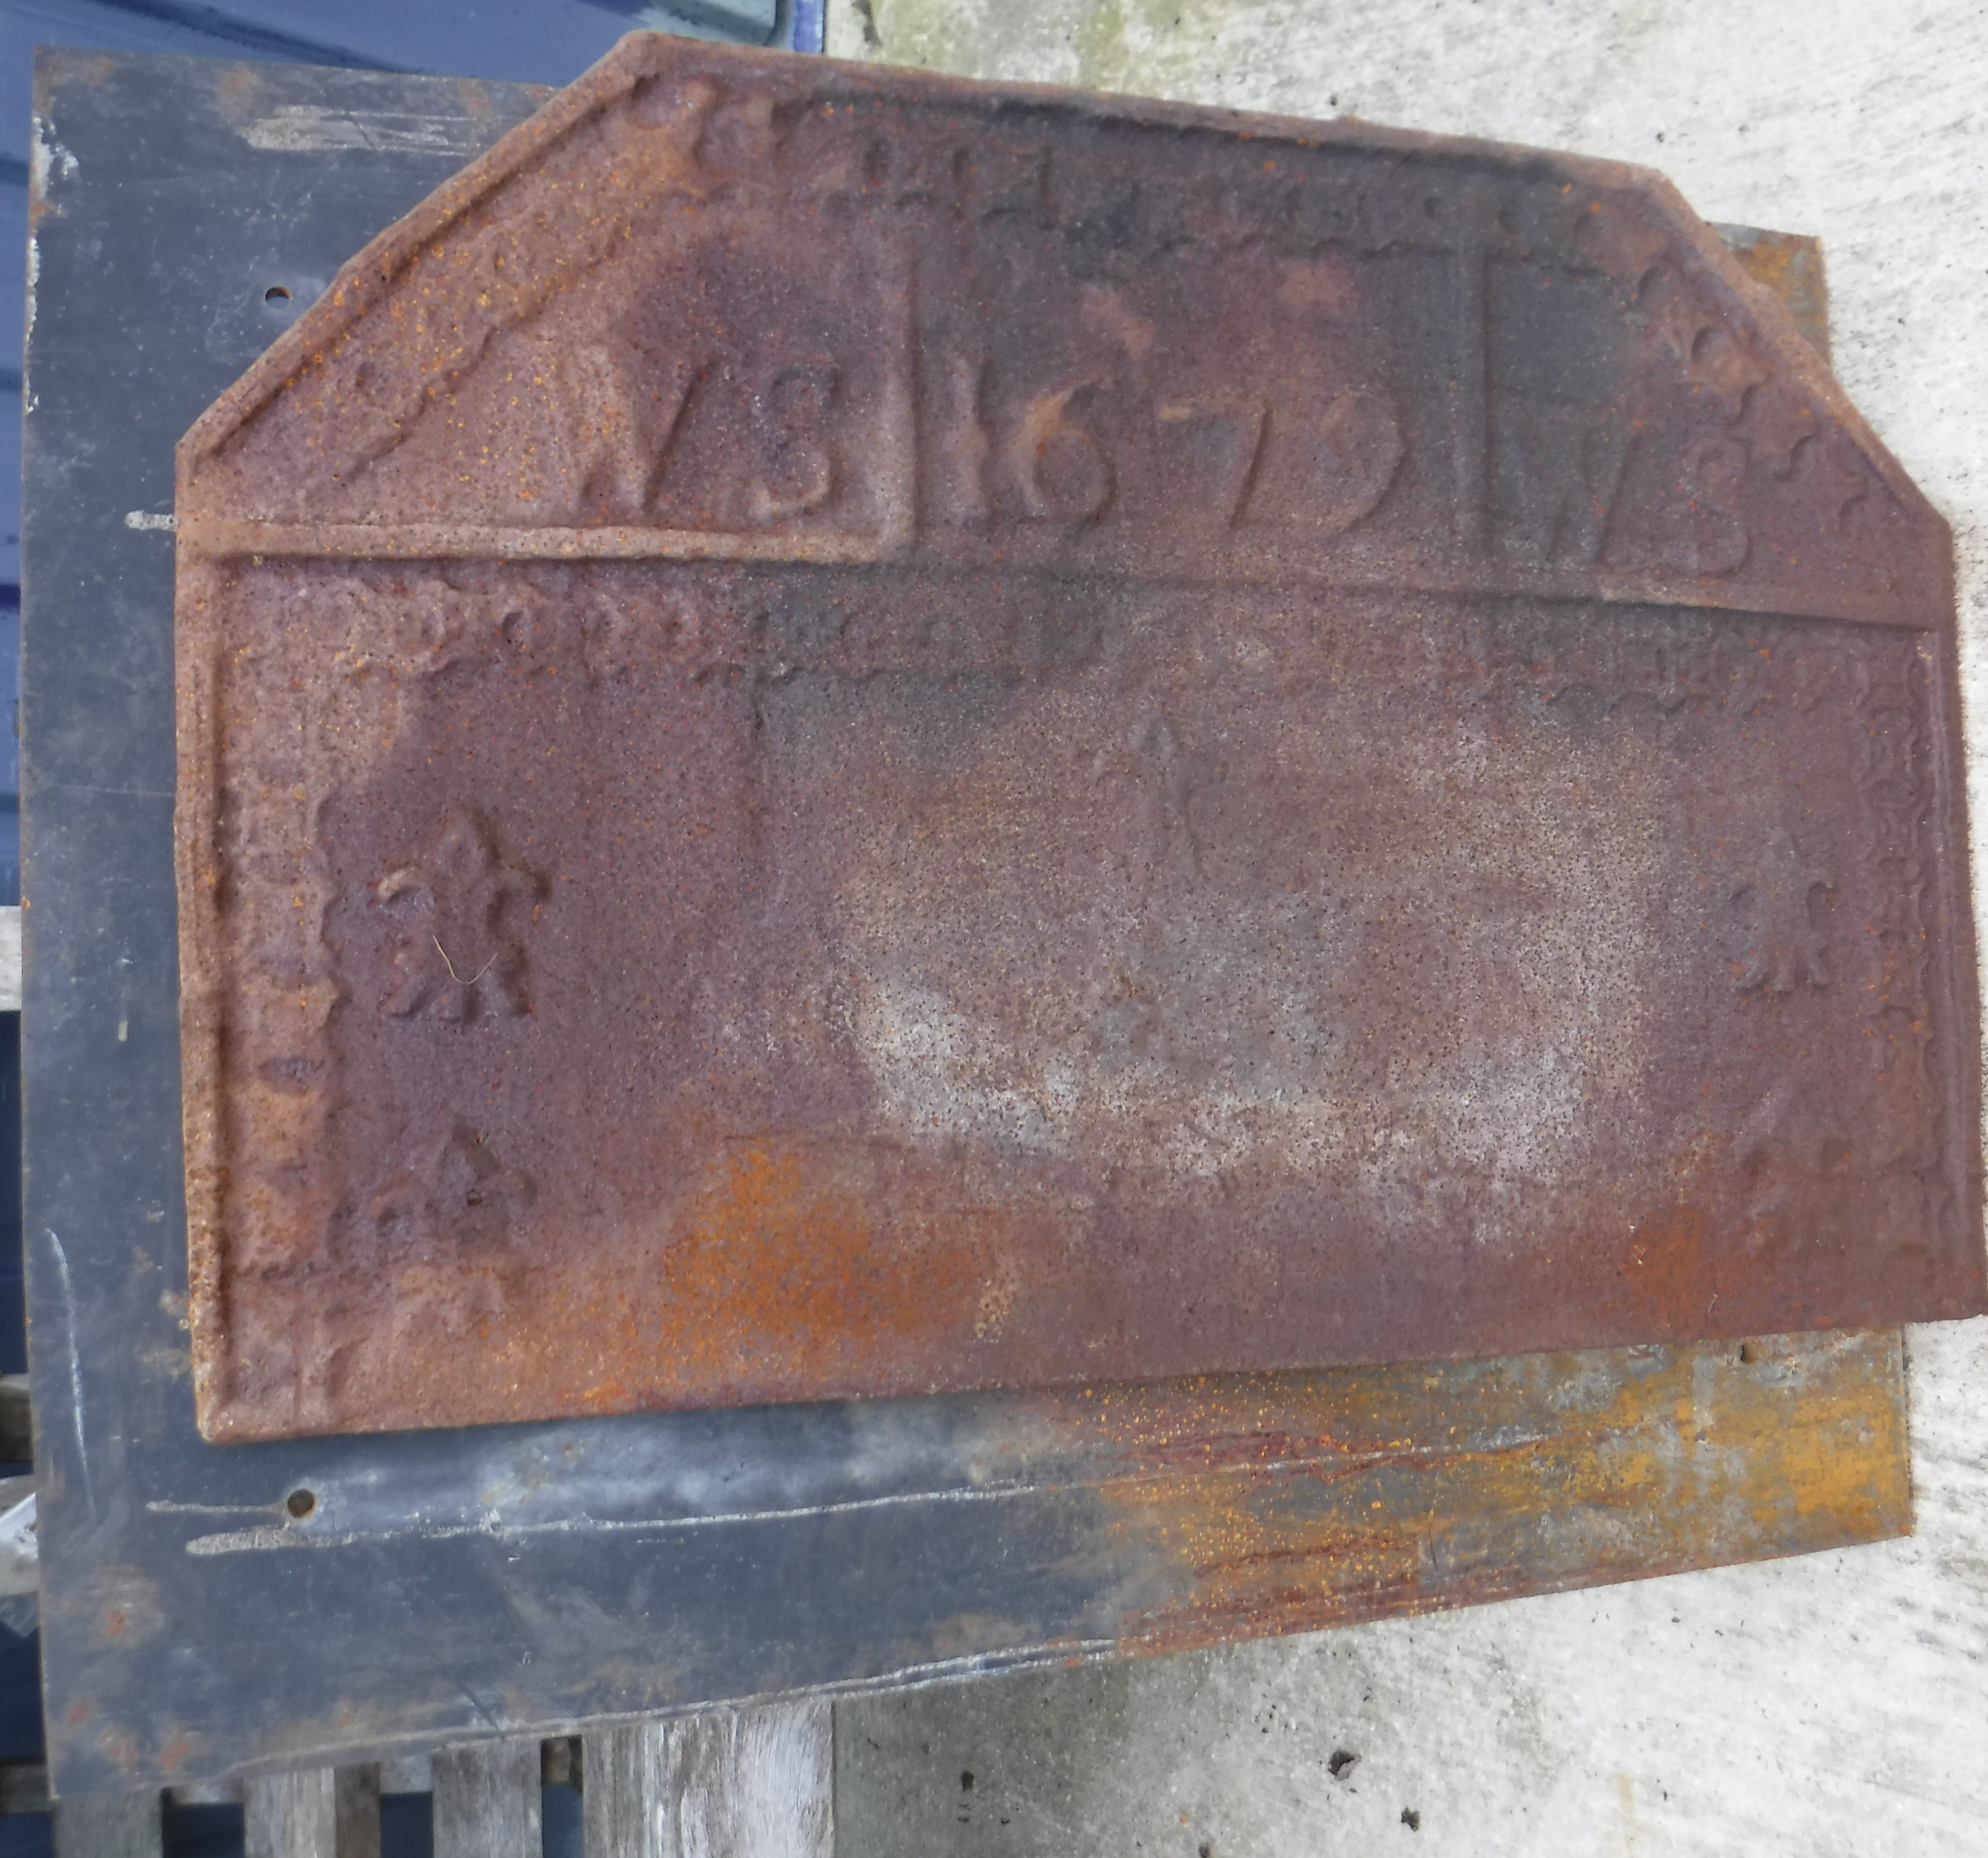 A cast iron fire back inscribed "1679",